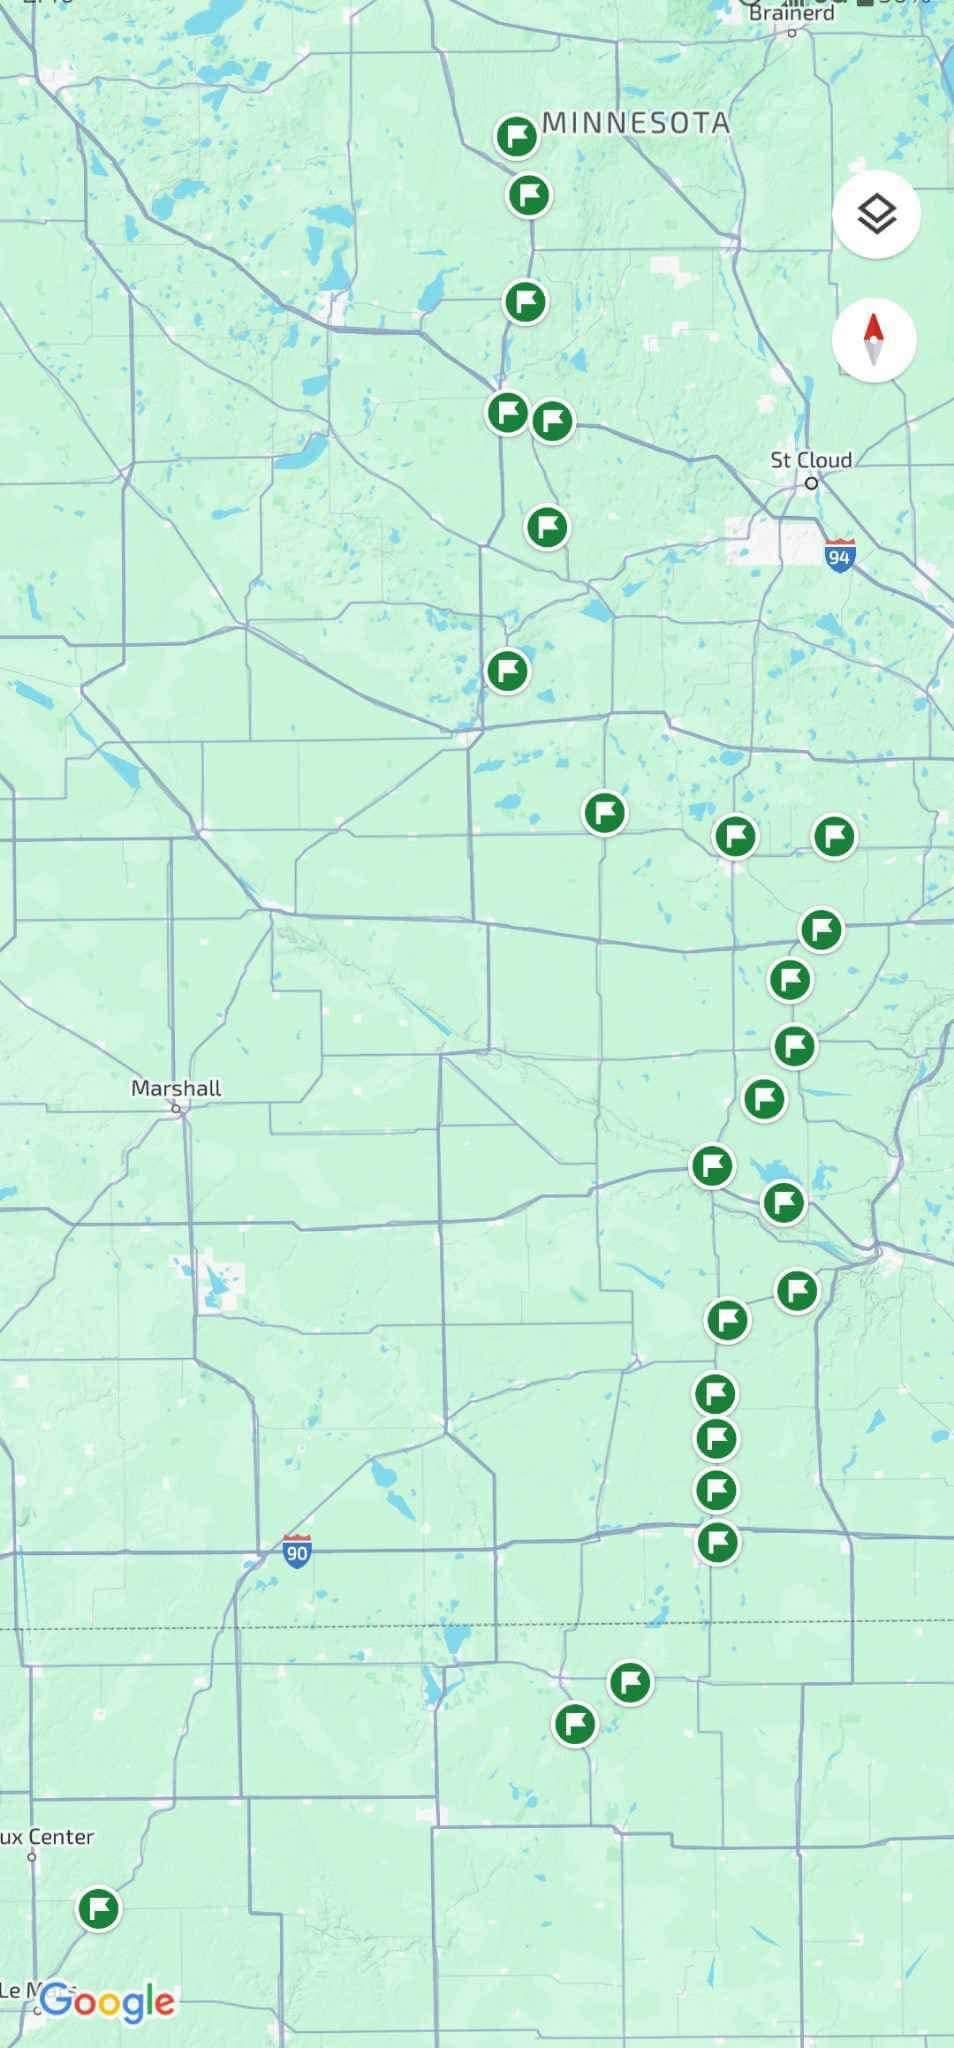 A map tracking Rutt as he moves up north through Minnesota.